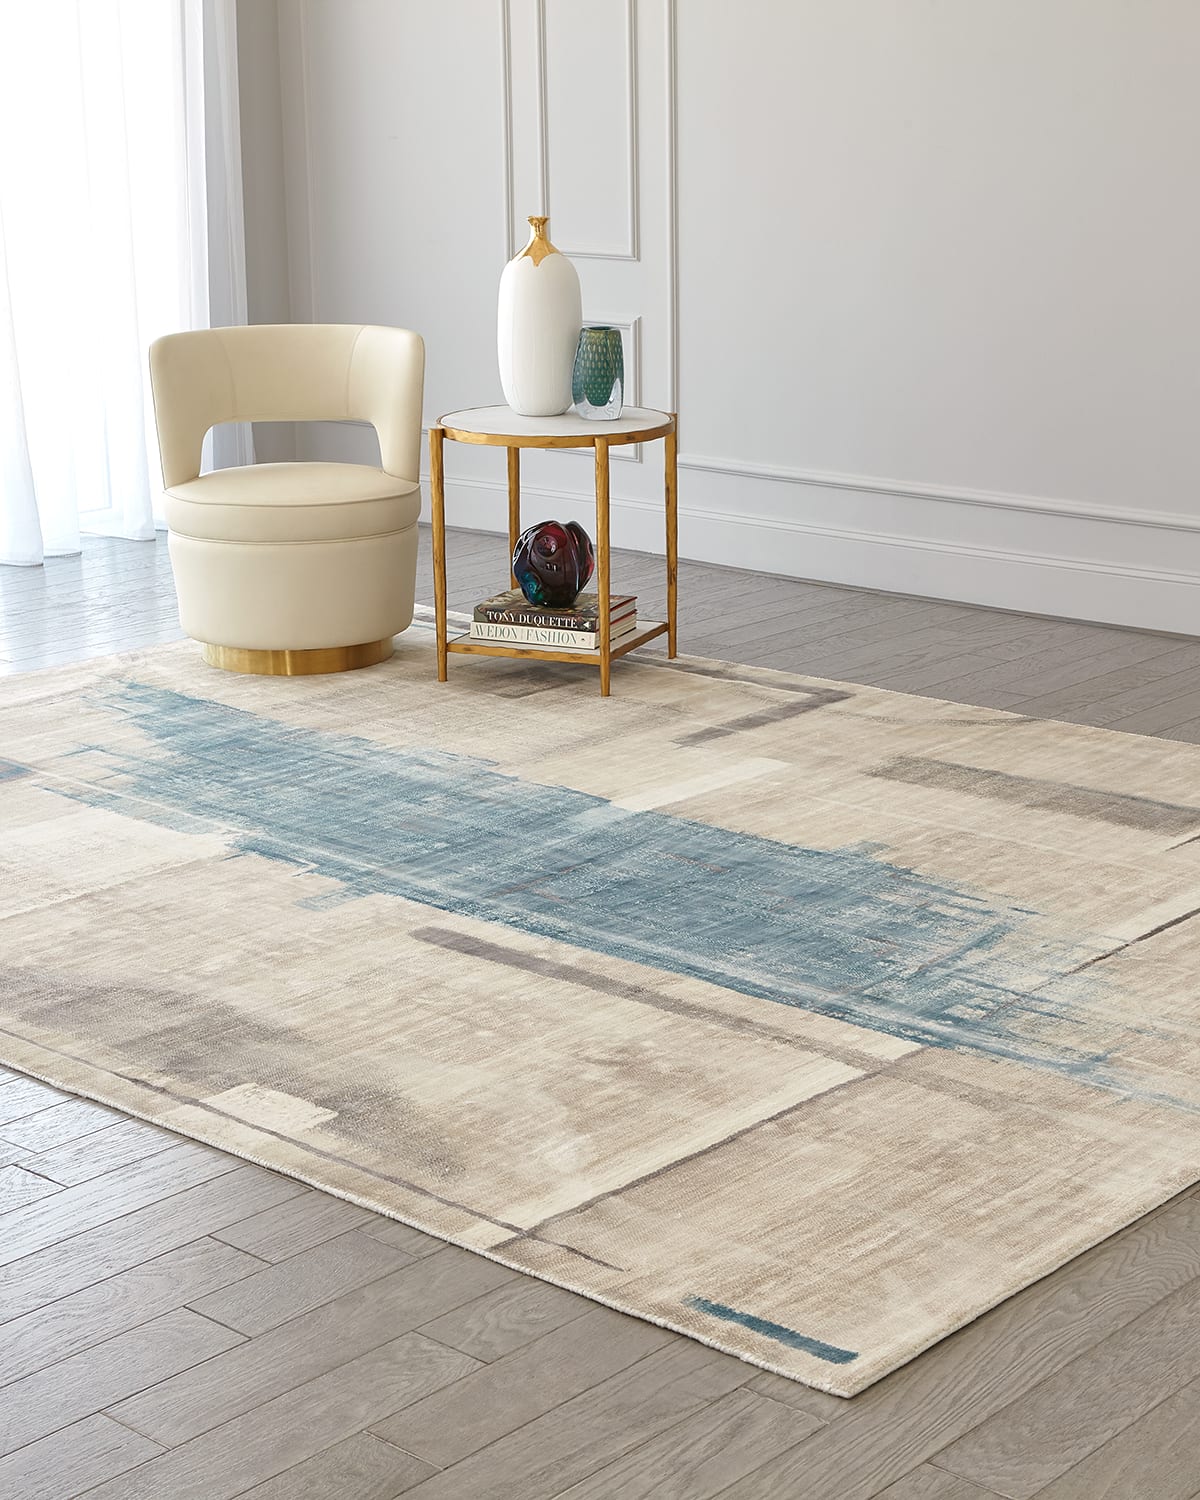 George Sellers For Global Views Art Hand-woven Rug, 6' X 9' In Blue